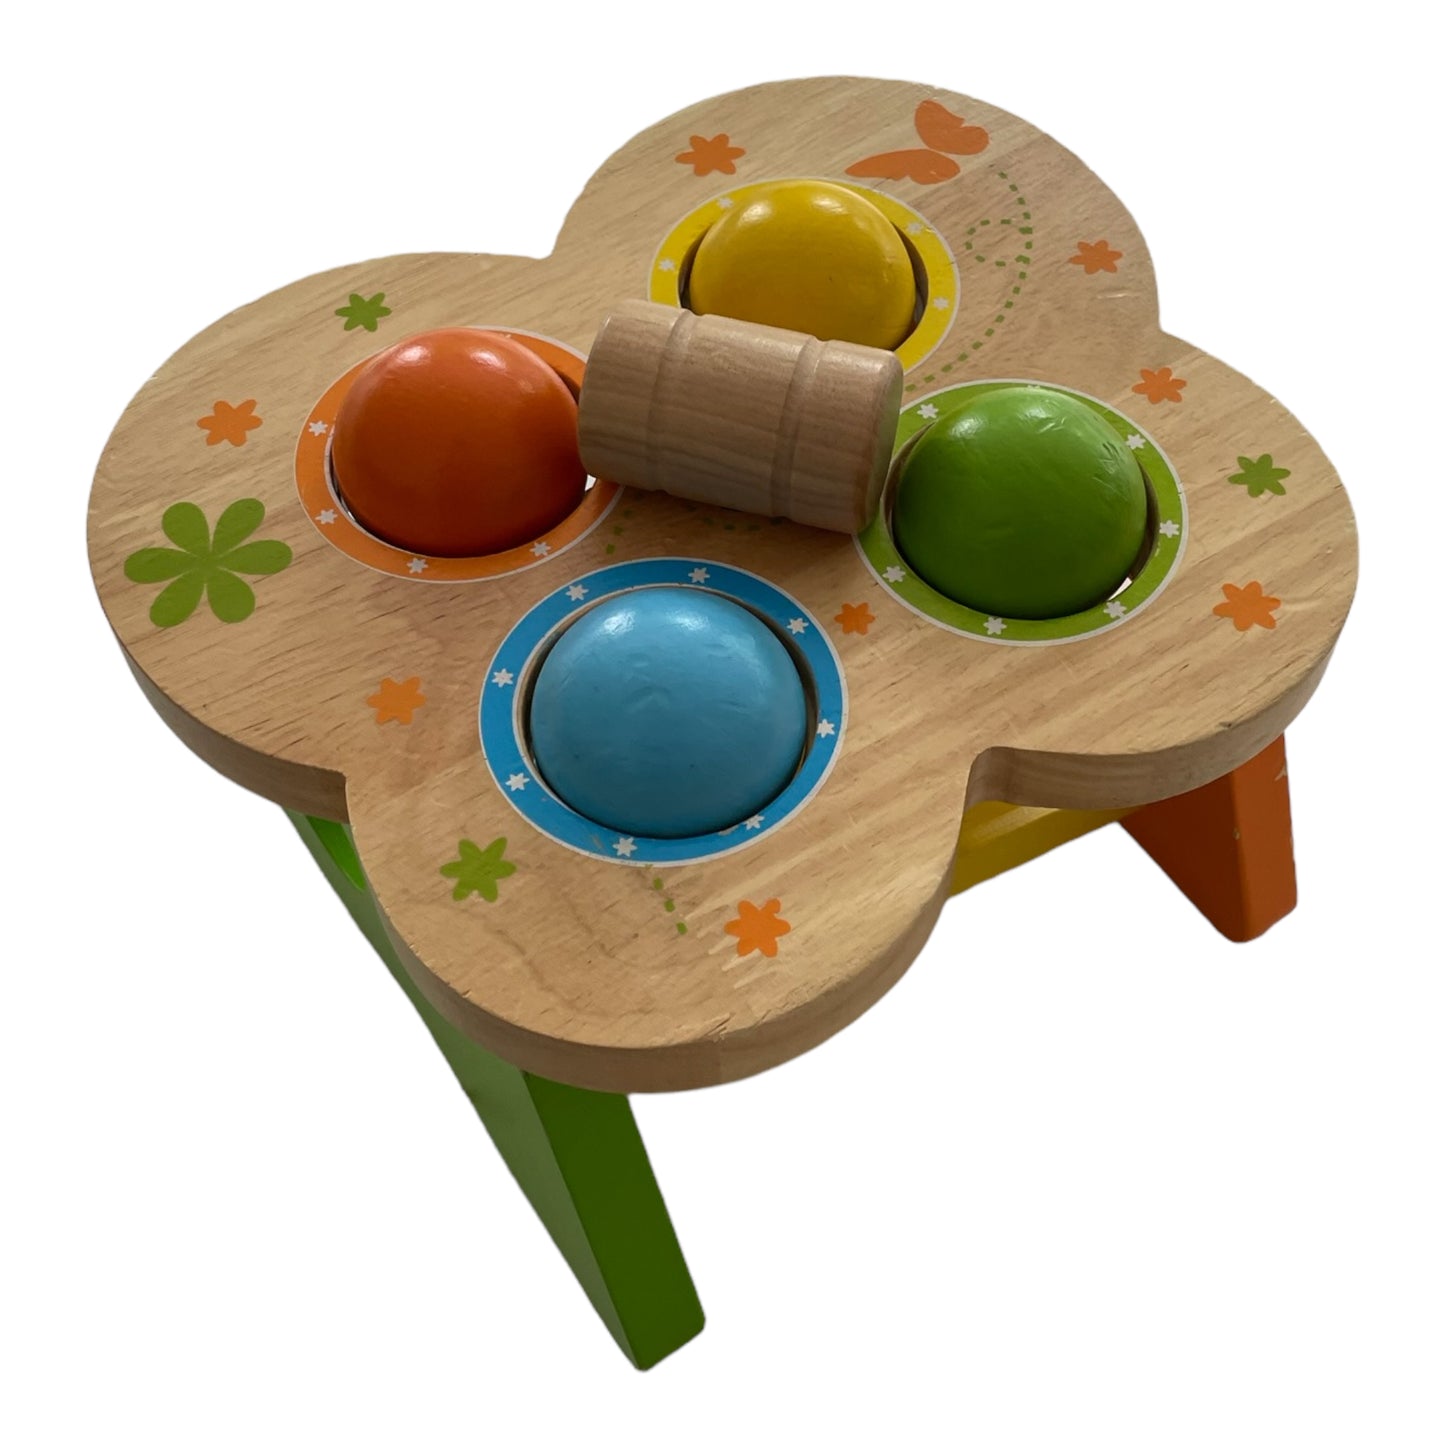 Ball track for baby with wooden bat and 4 colored balls